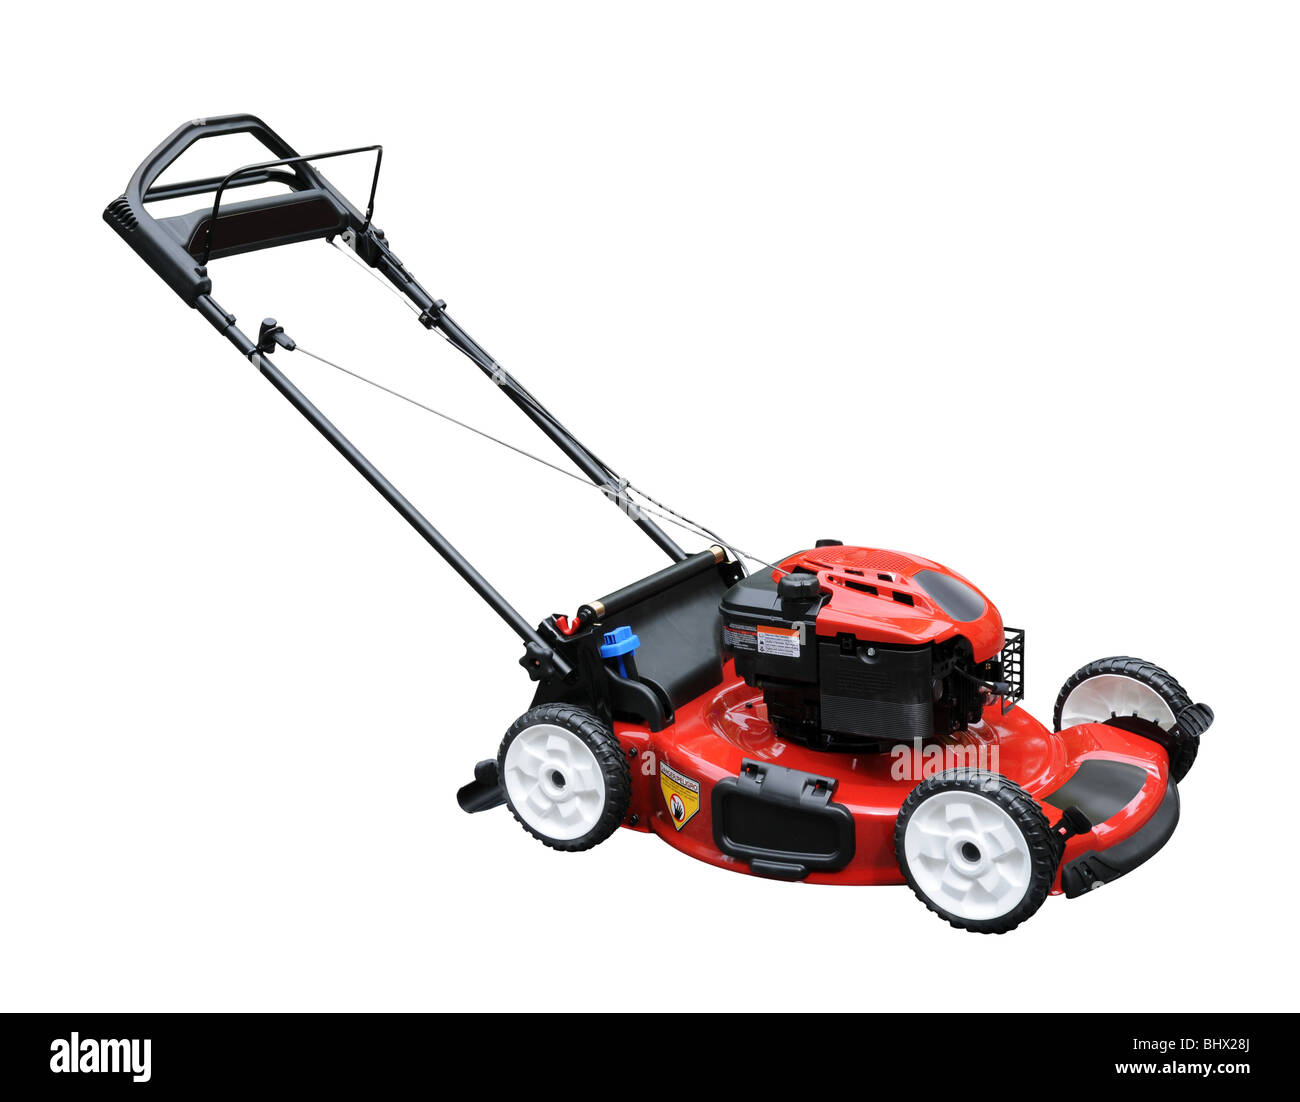 Lawn mower isolated over white background Stock Photo